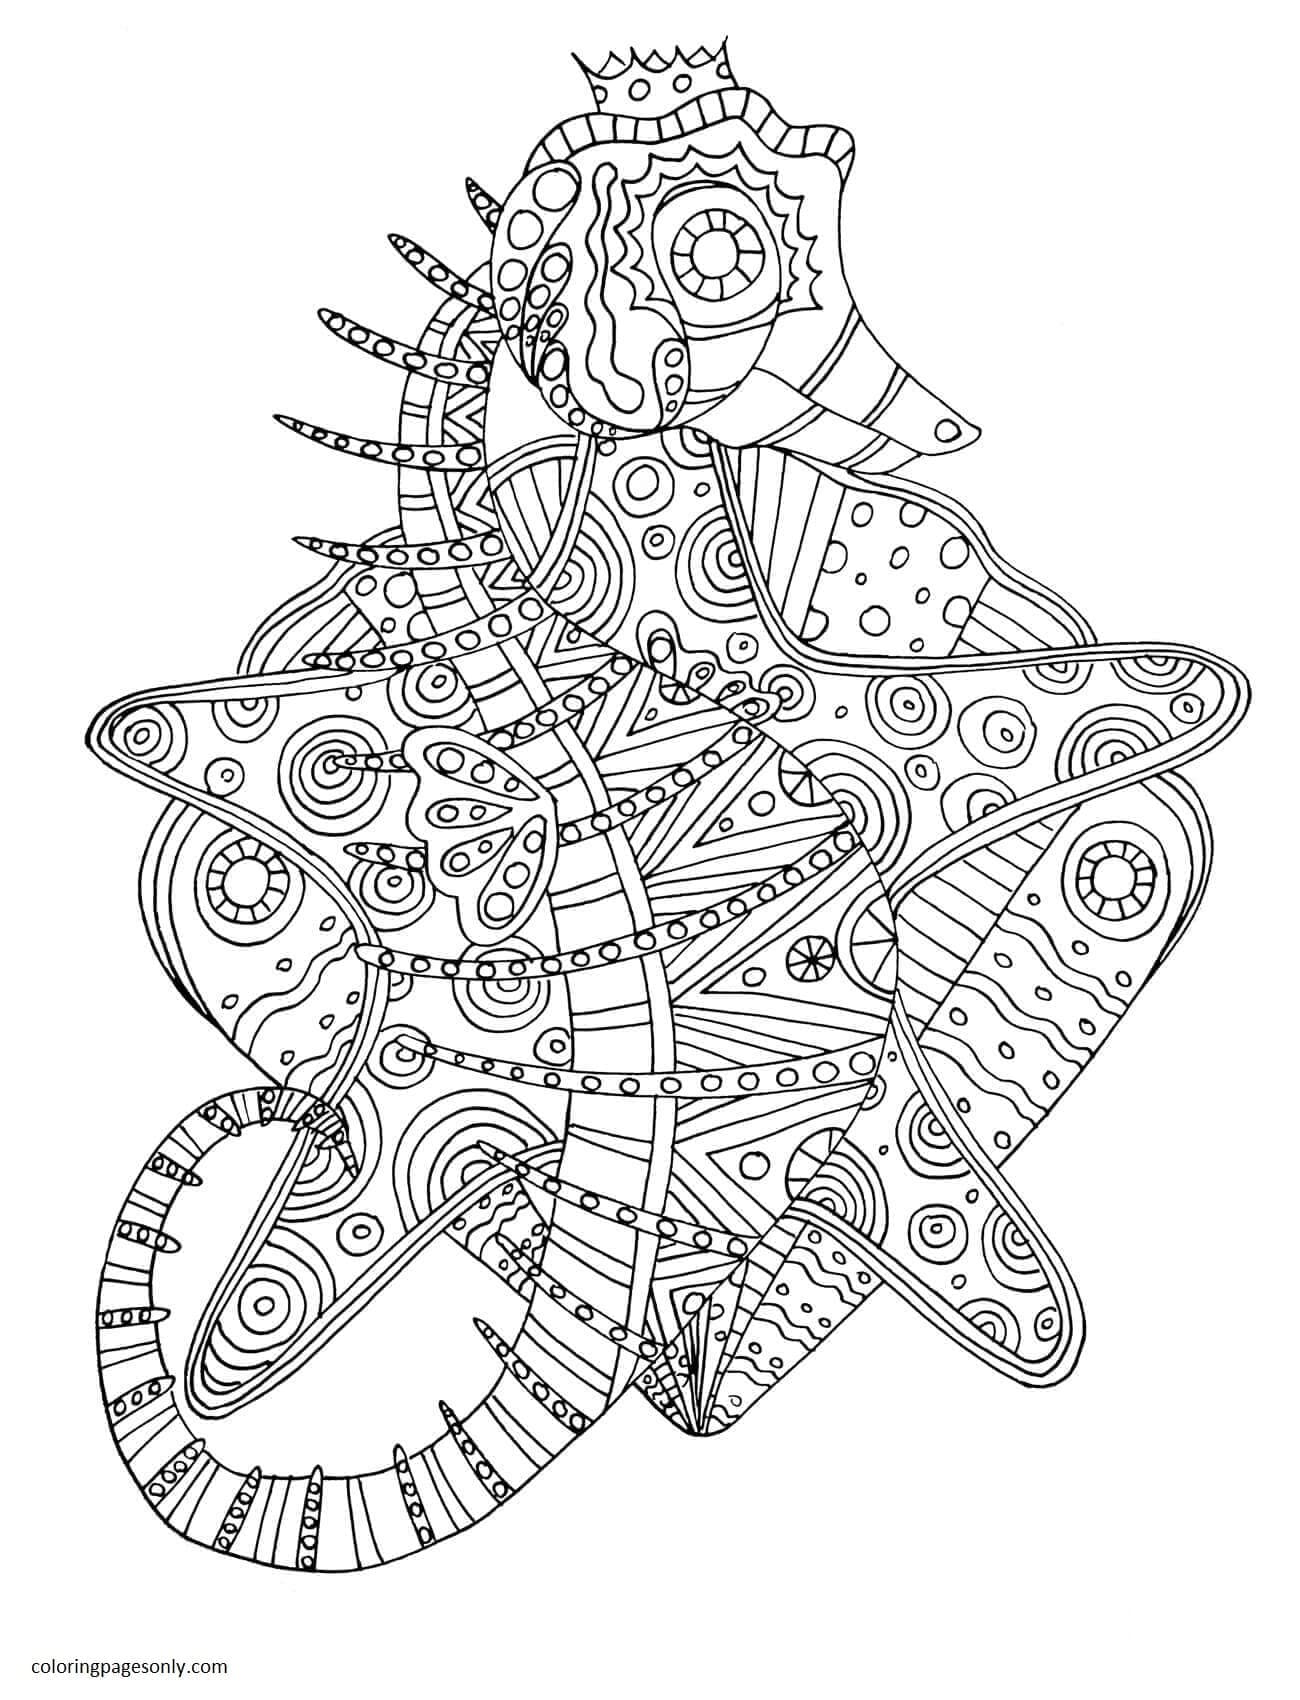 Seahorse with Tribal Pattern Coloring Page